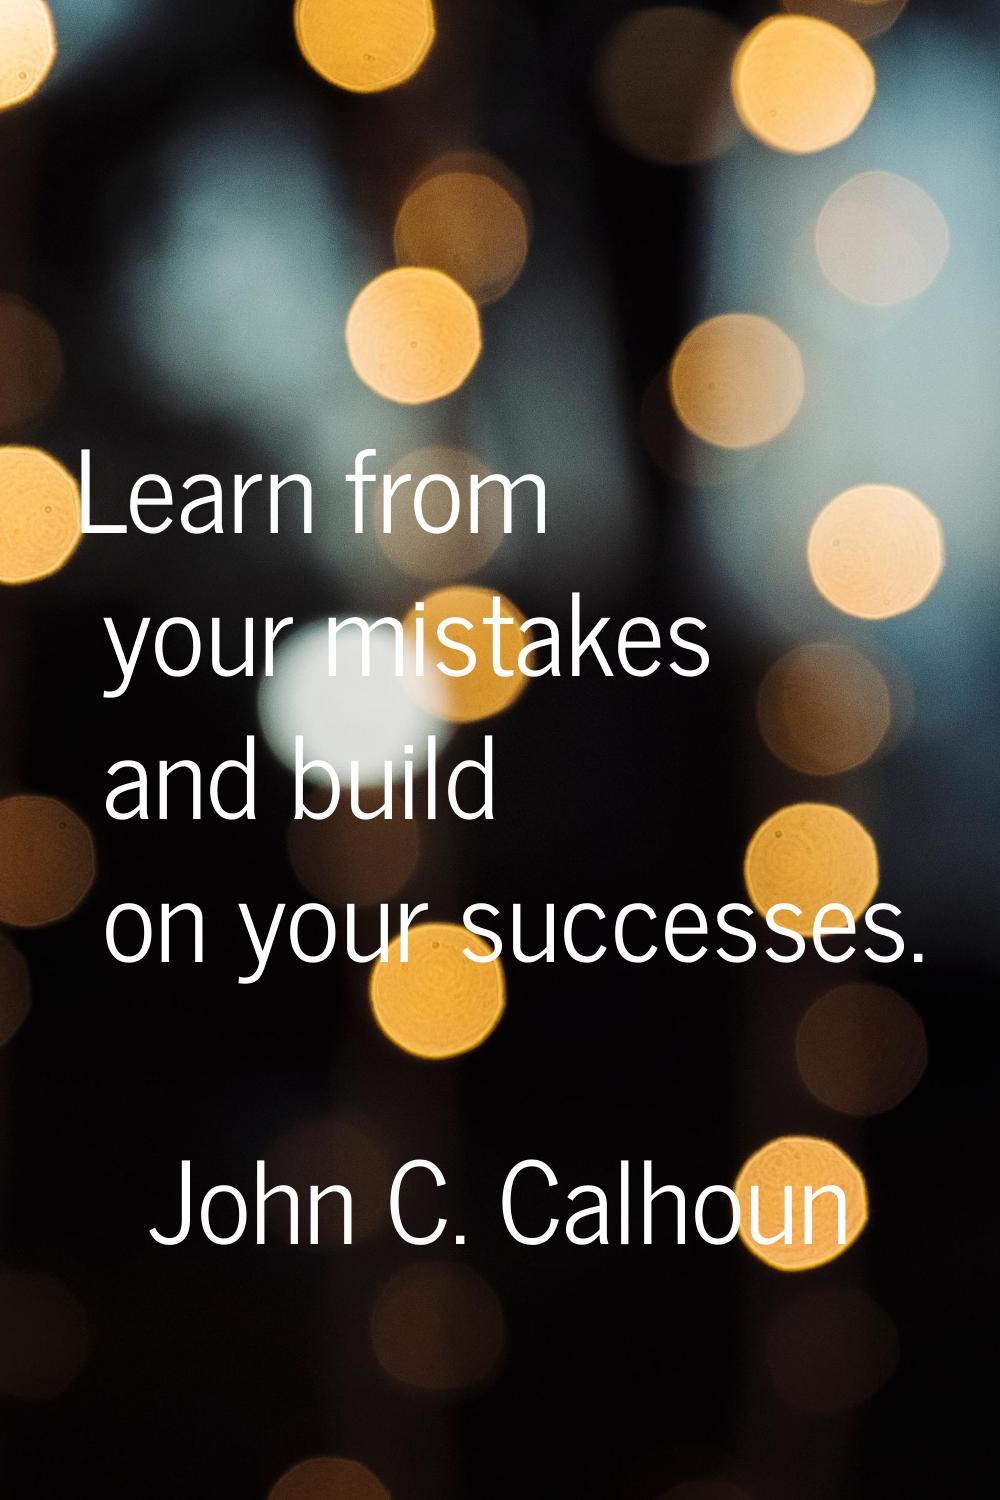 Learn from your mistakes and build on your successes.